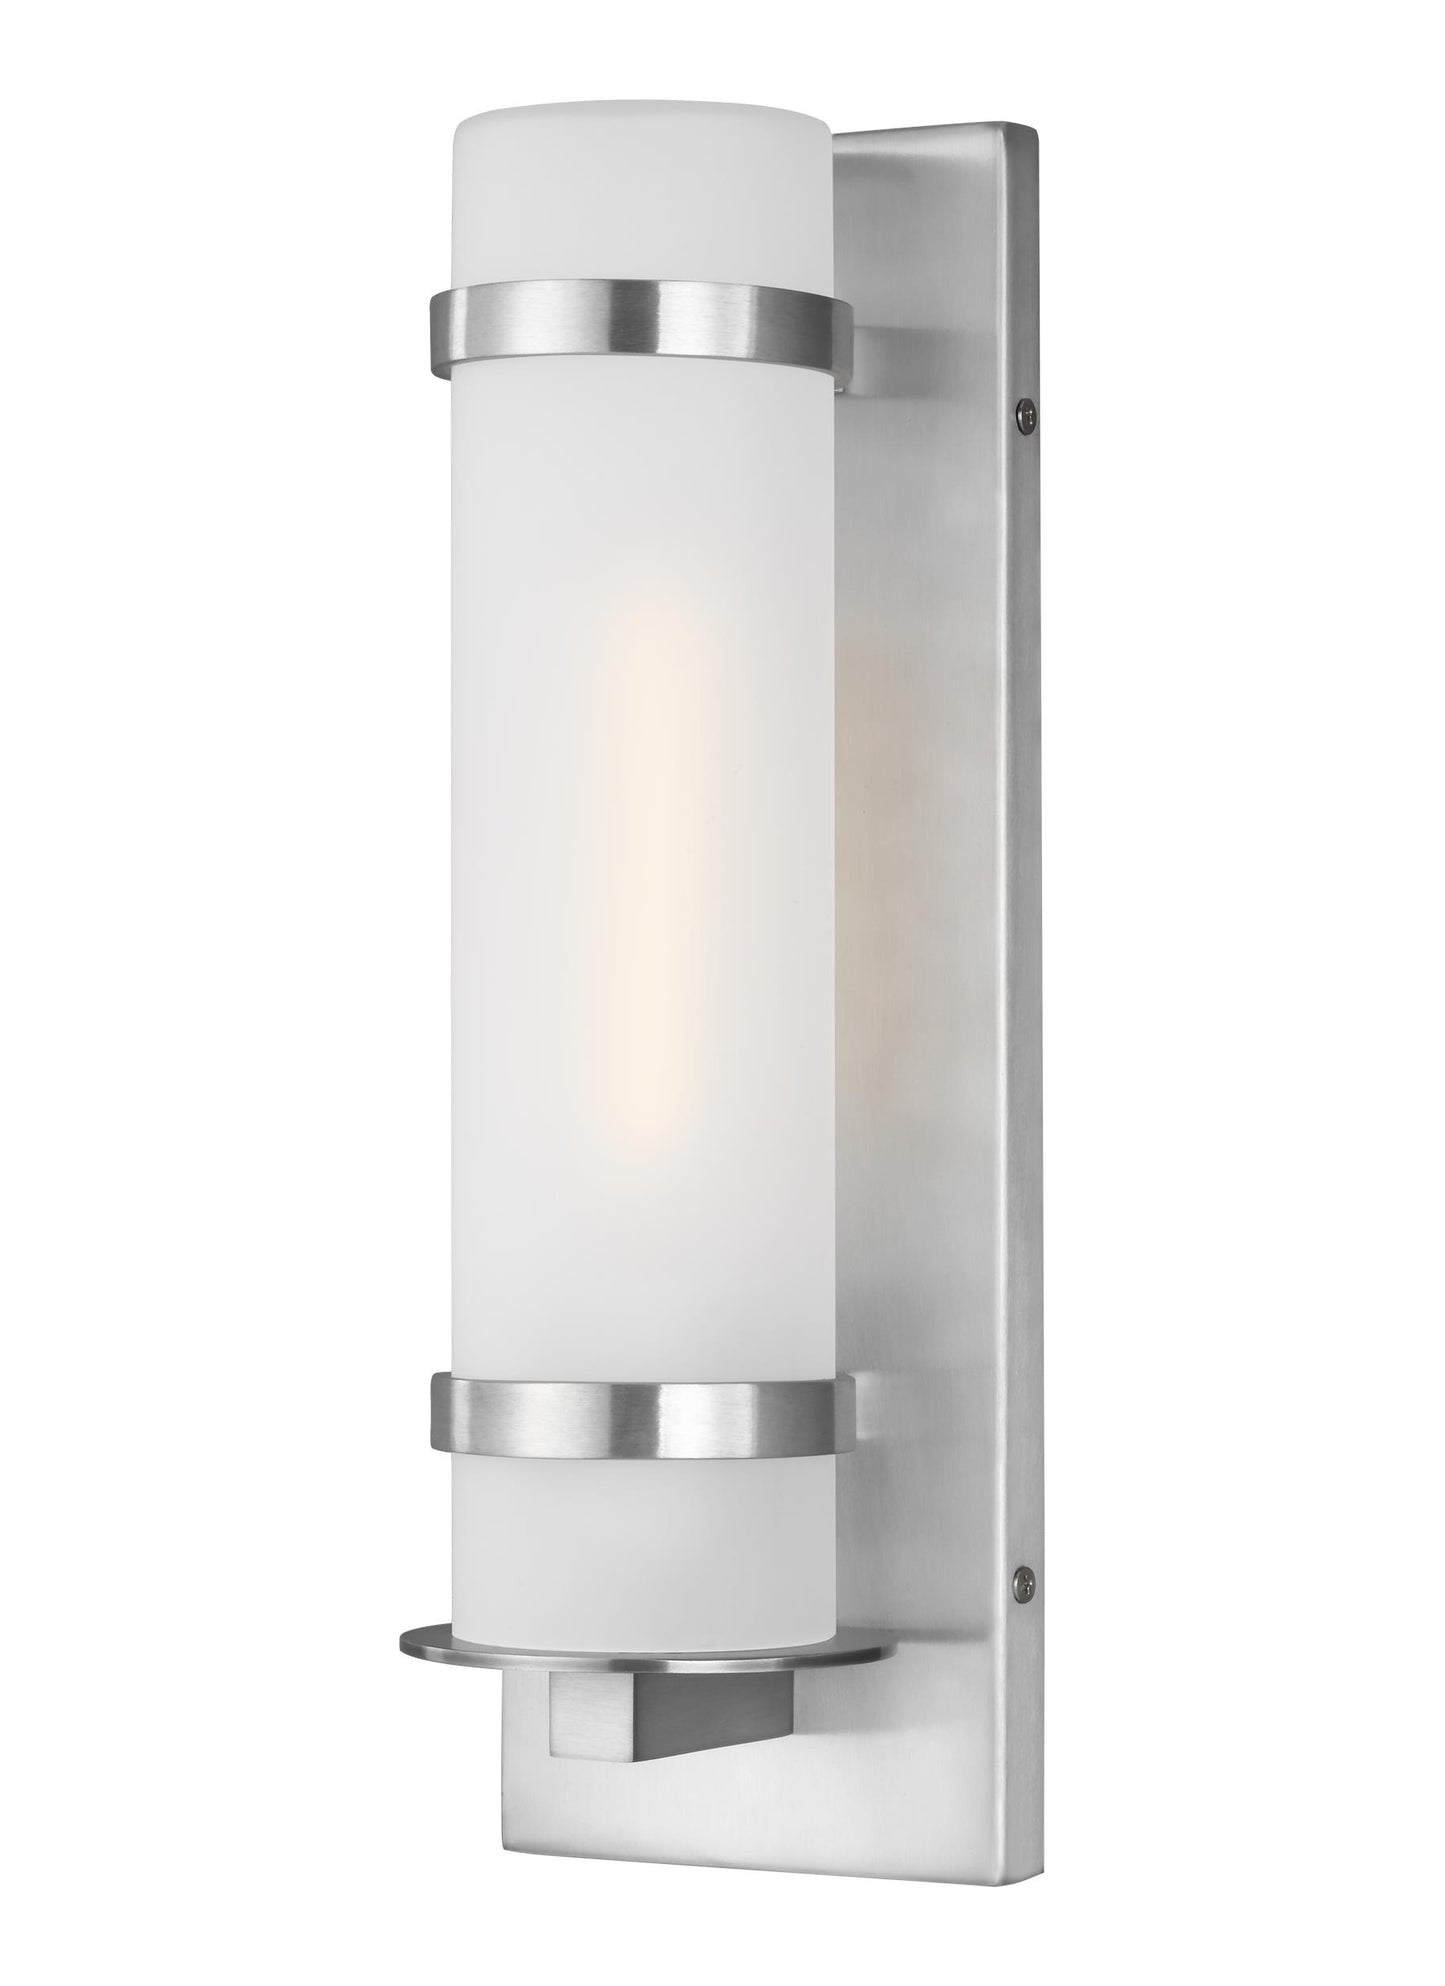 Alban modern 1-light outdoor exterior small round wall lantern in satin aluminum silver with etched opal glass shade